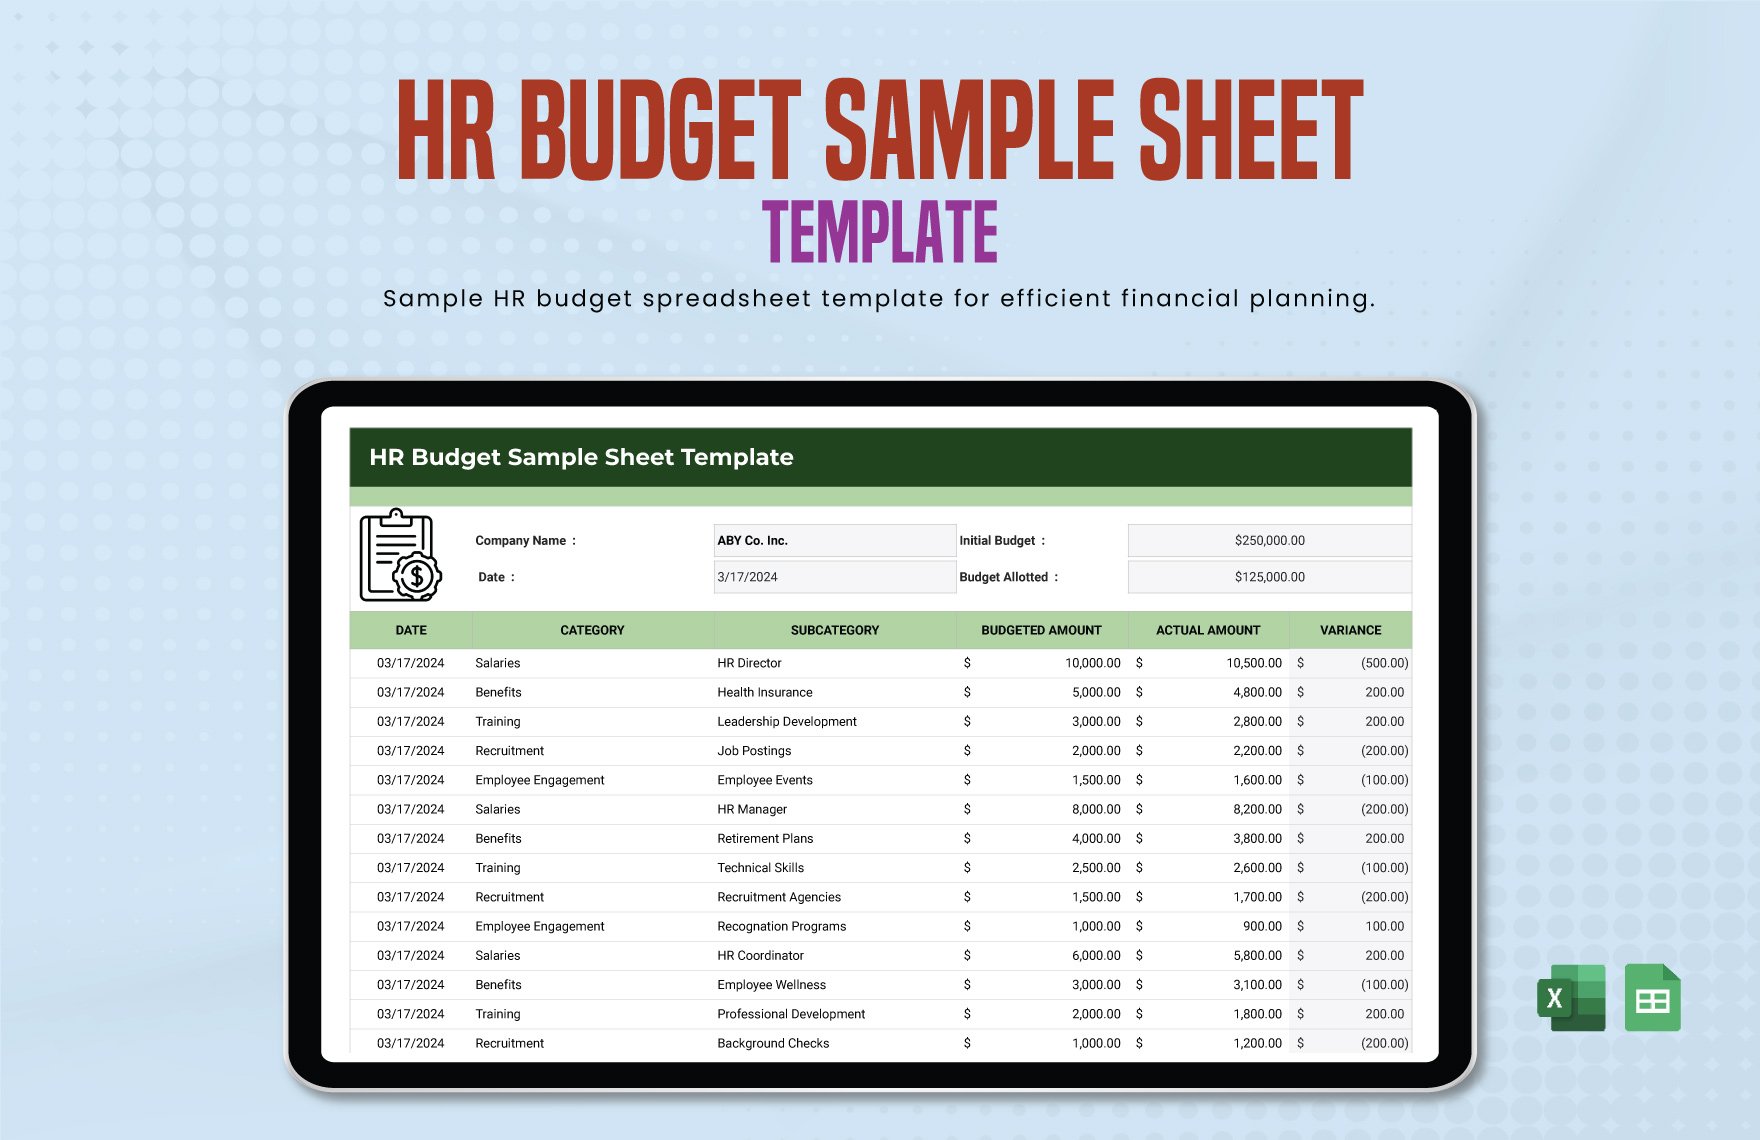 HR Budget Sample Sheet Template in Excel, Google Sheets